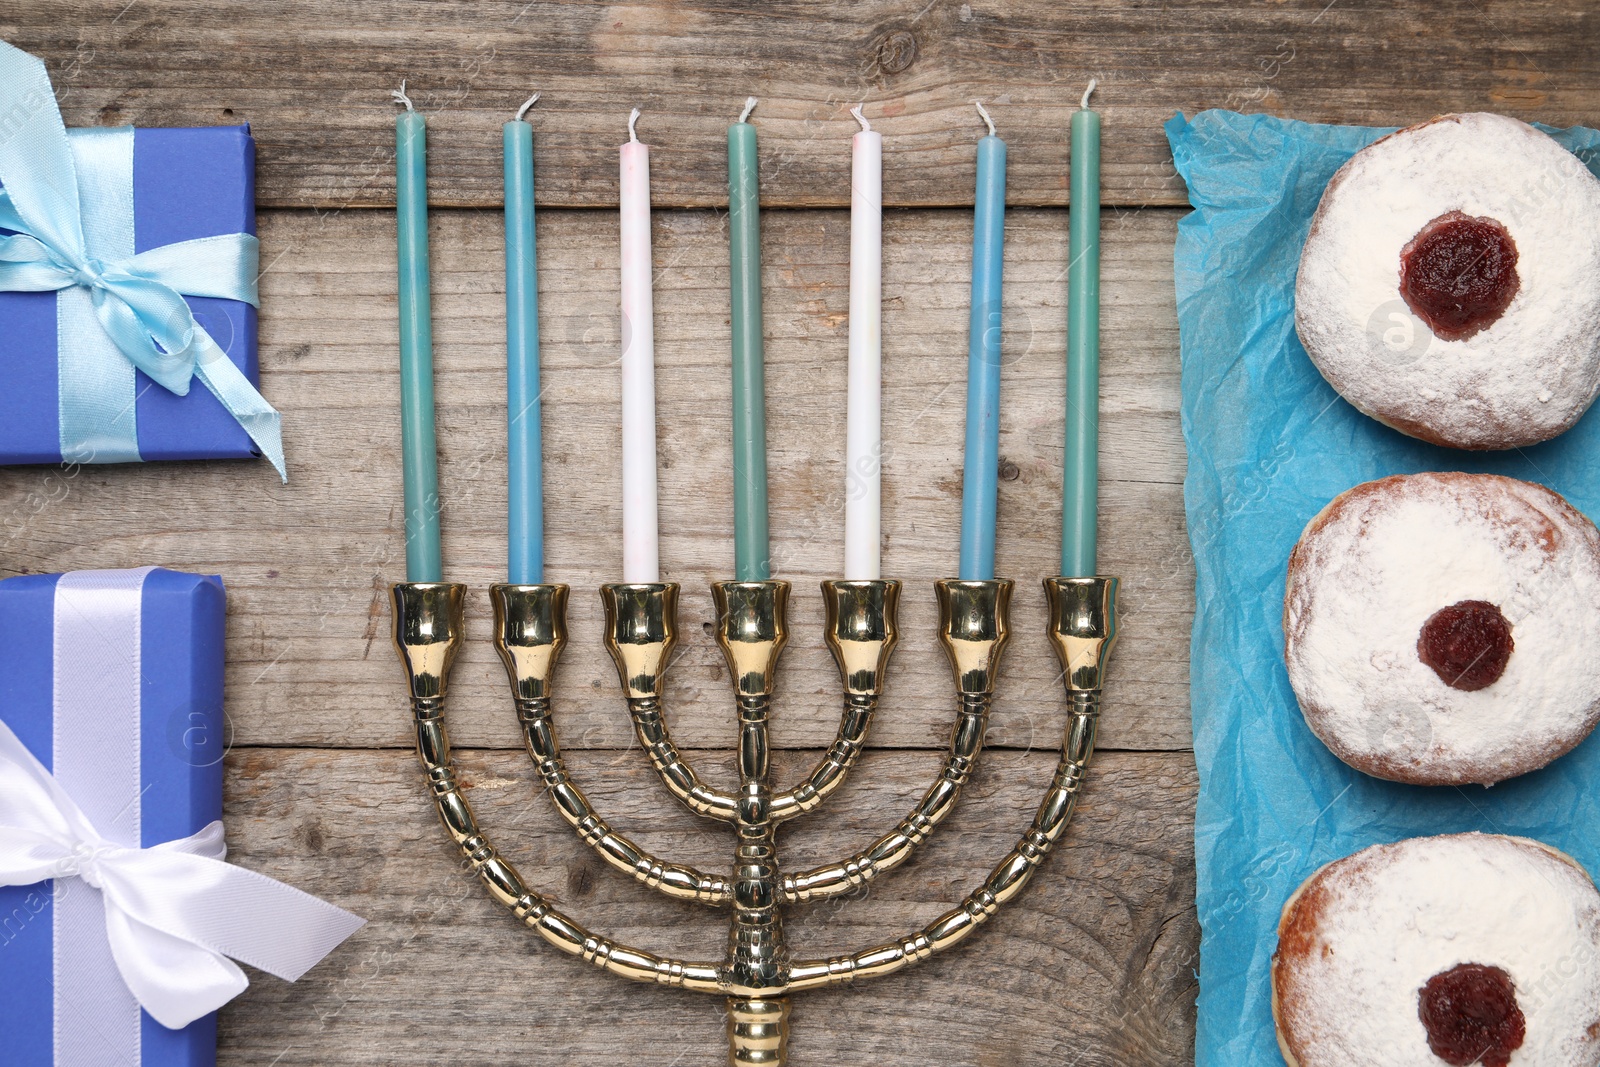 Photo of Flat lay composition with Hanukkah menorah and gift boxes on wooden table